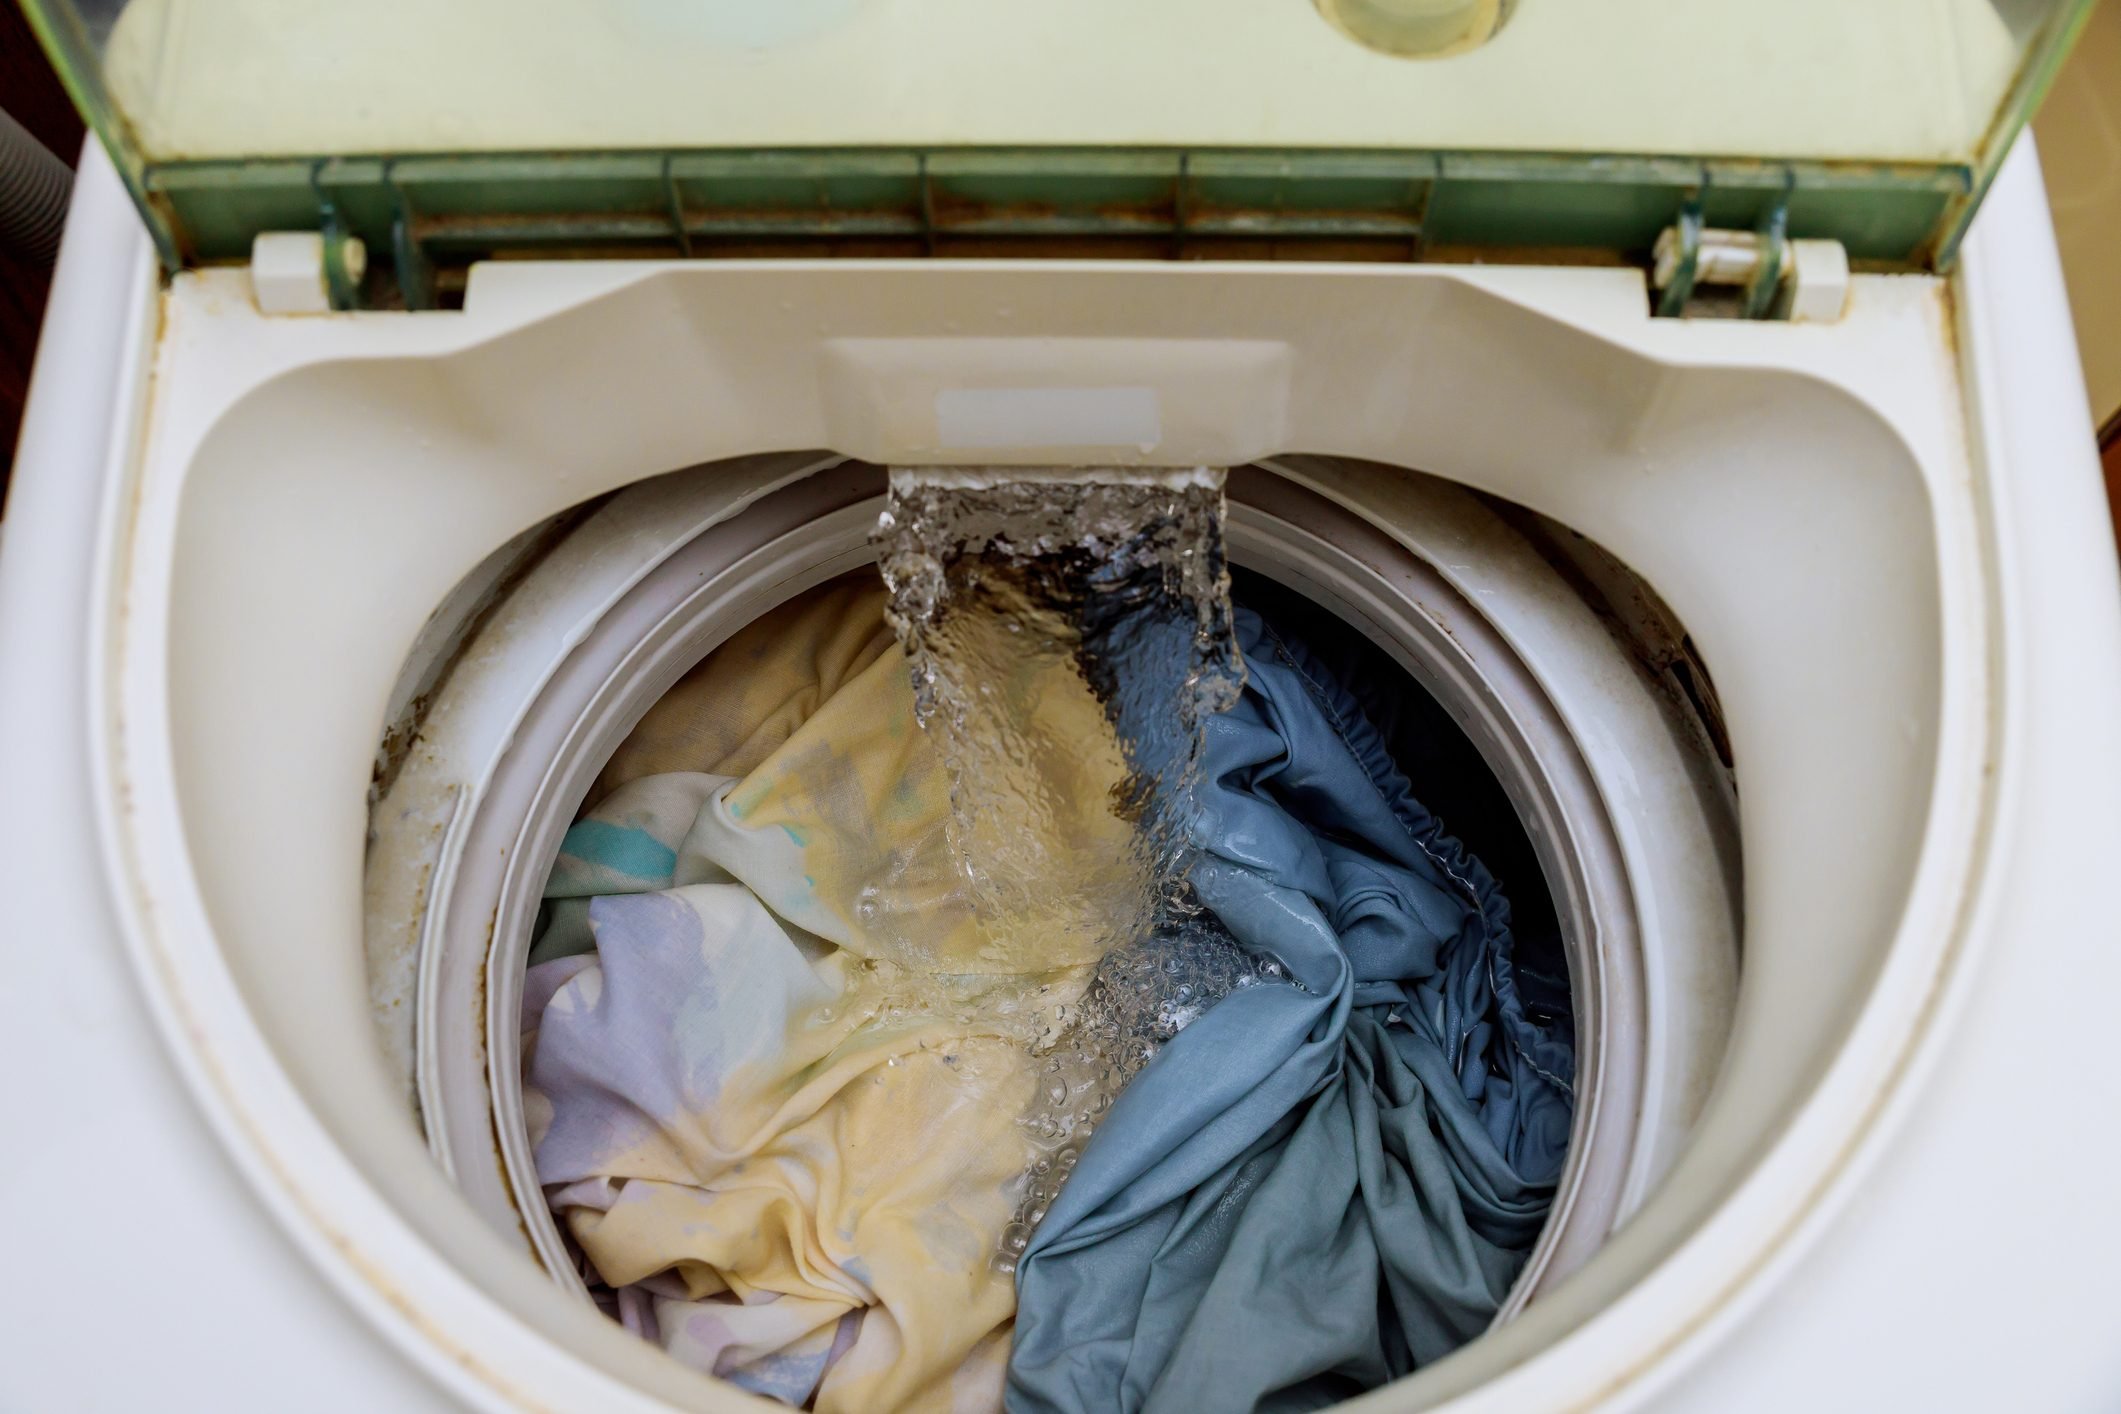 How to clean an automatic washing machine